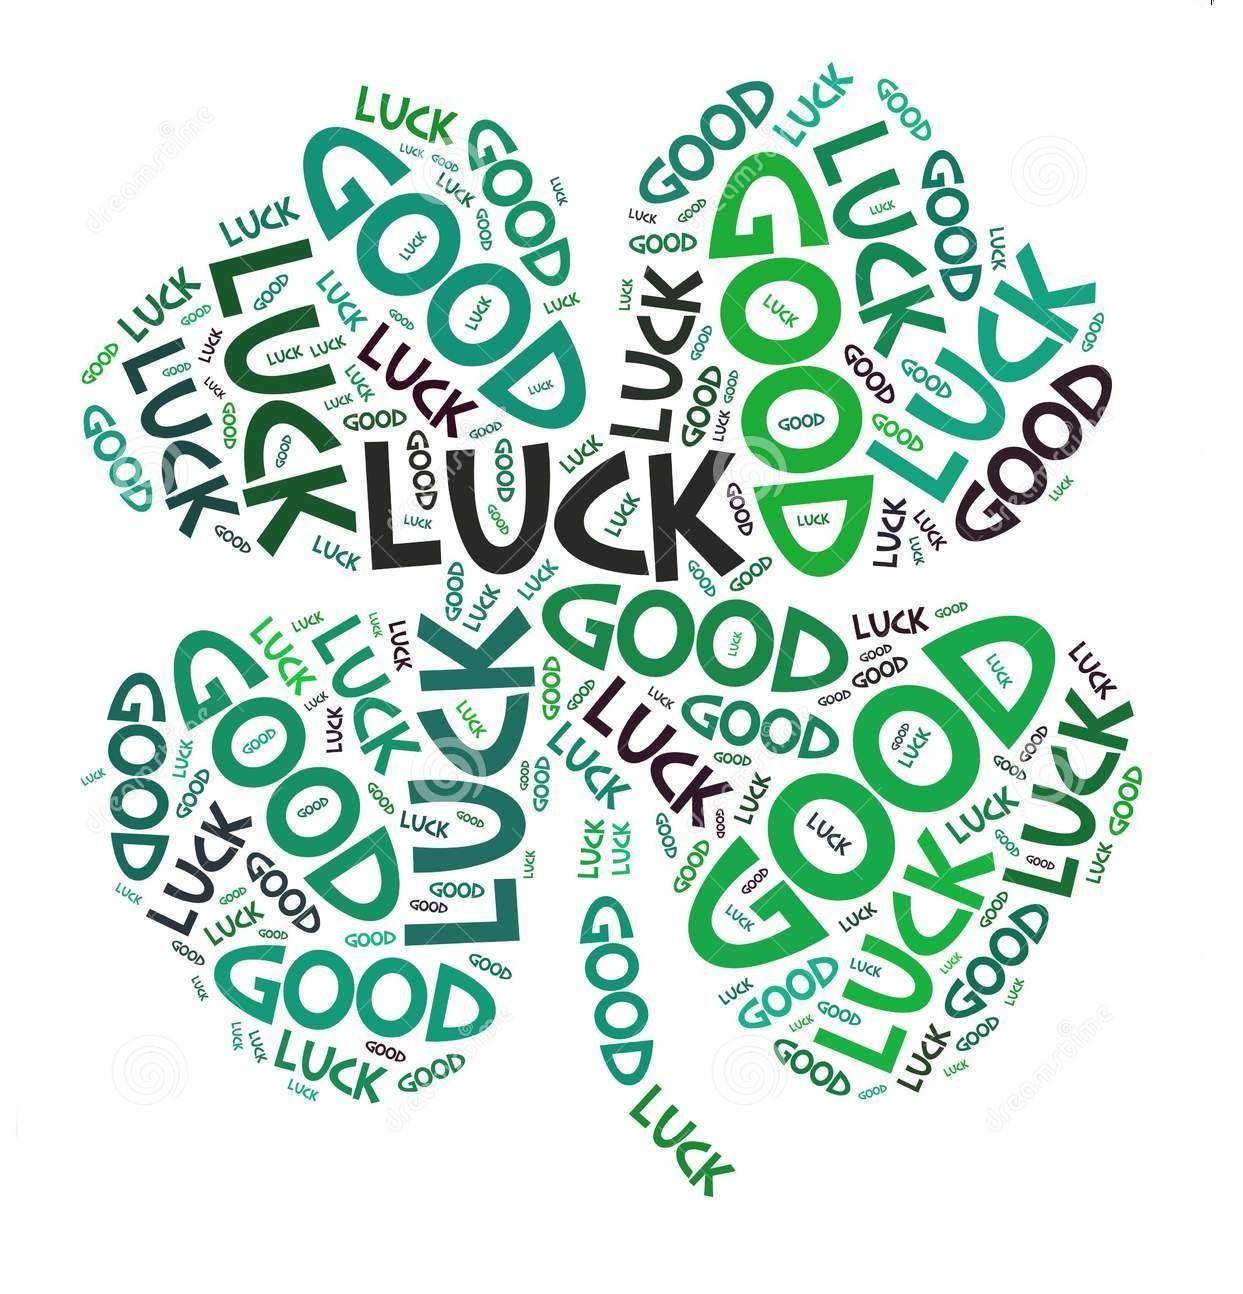 Good luck picture image Good luck picture7